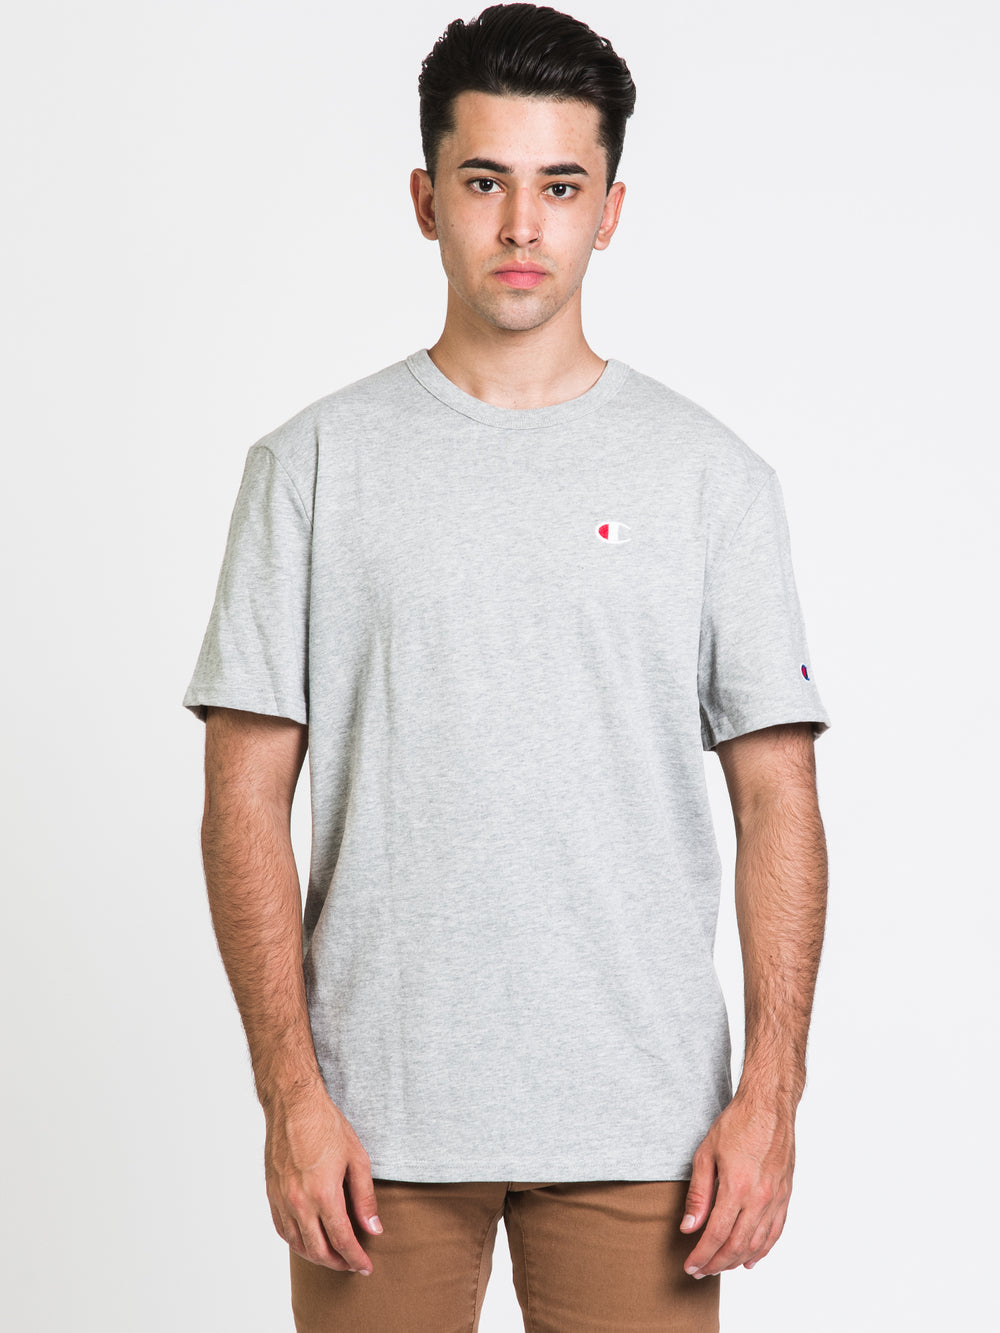 CHAMPION HERITAGE SMALL C T-SHIRT - CLEARANCE